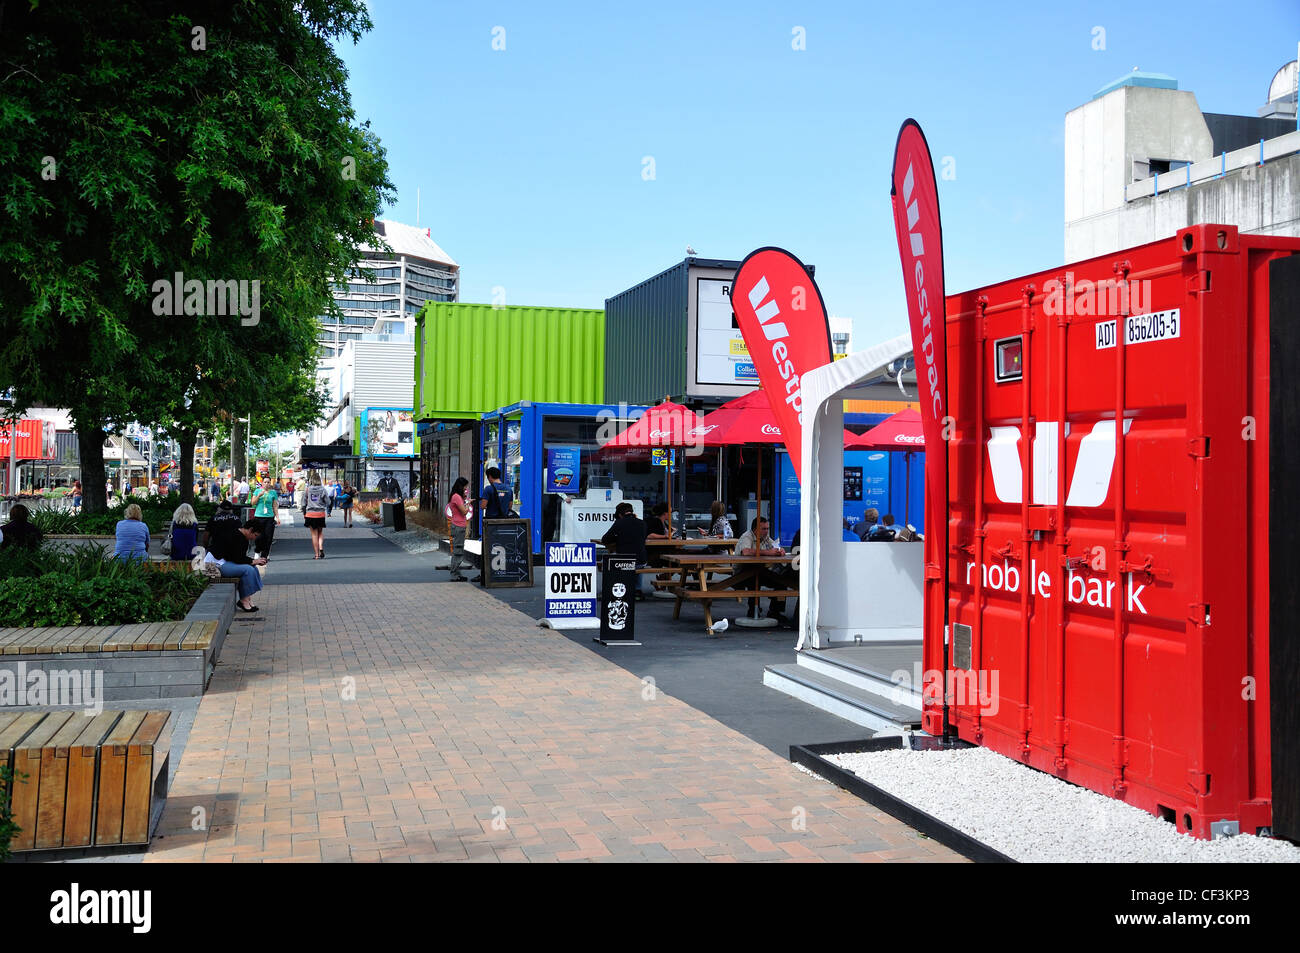 Re:start Container City built after earthquakes, Cashel Mall, CBD, Christchurch, Canterbury District, New Zealand Stock Photo